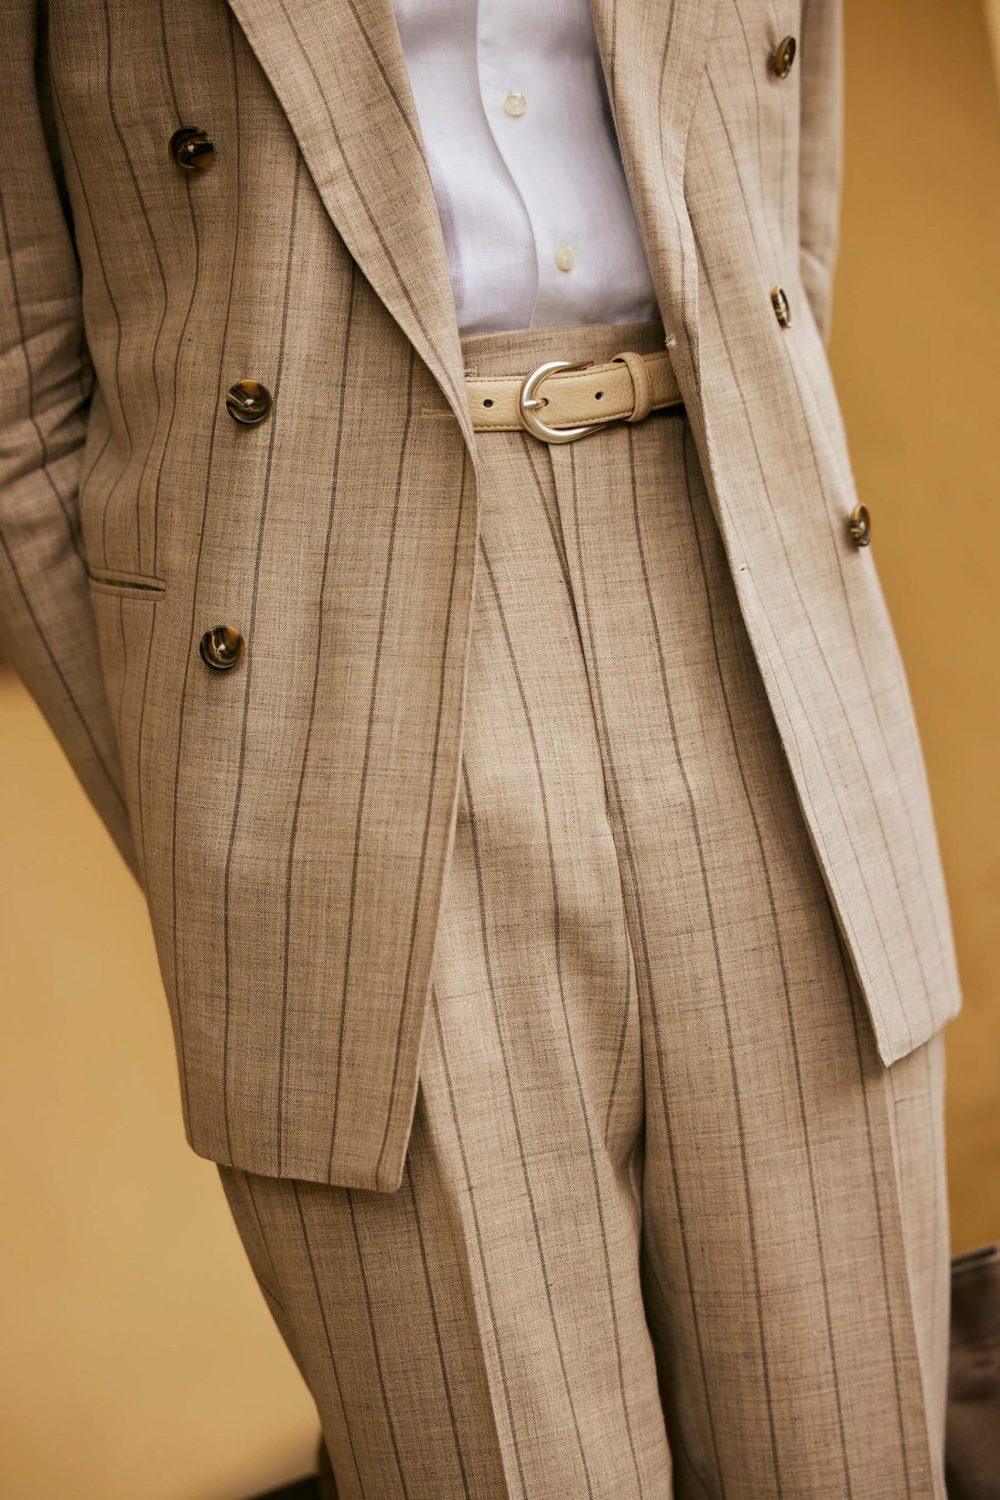 carlos domord at pitti uomo wearing a custom made taupe beige striped suit